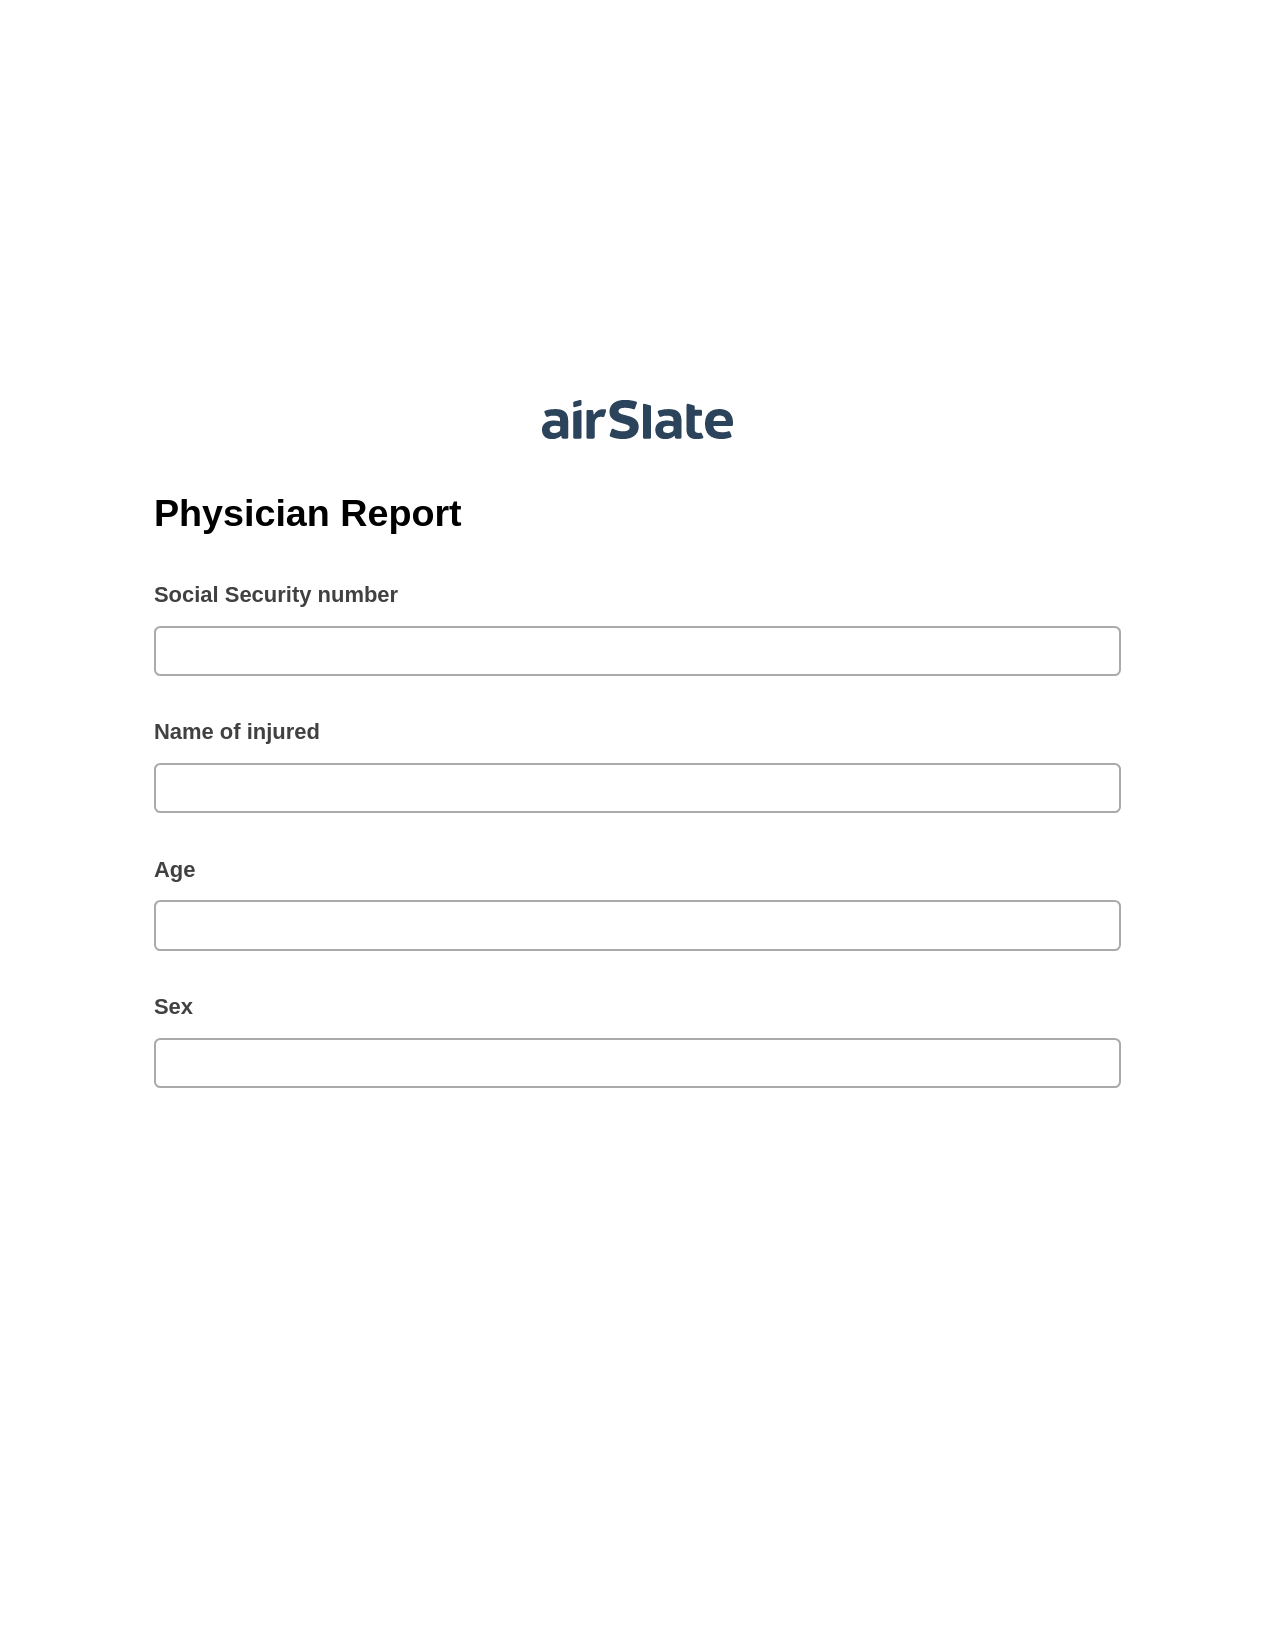 Multirole Physician Report Prefill from NetSuite records, Create NetSuite Record bot, Archive to Box Bot